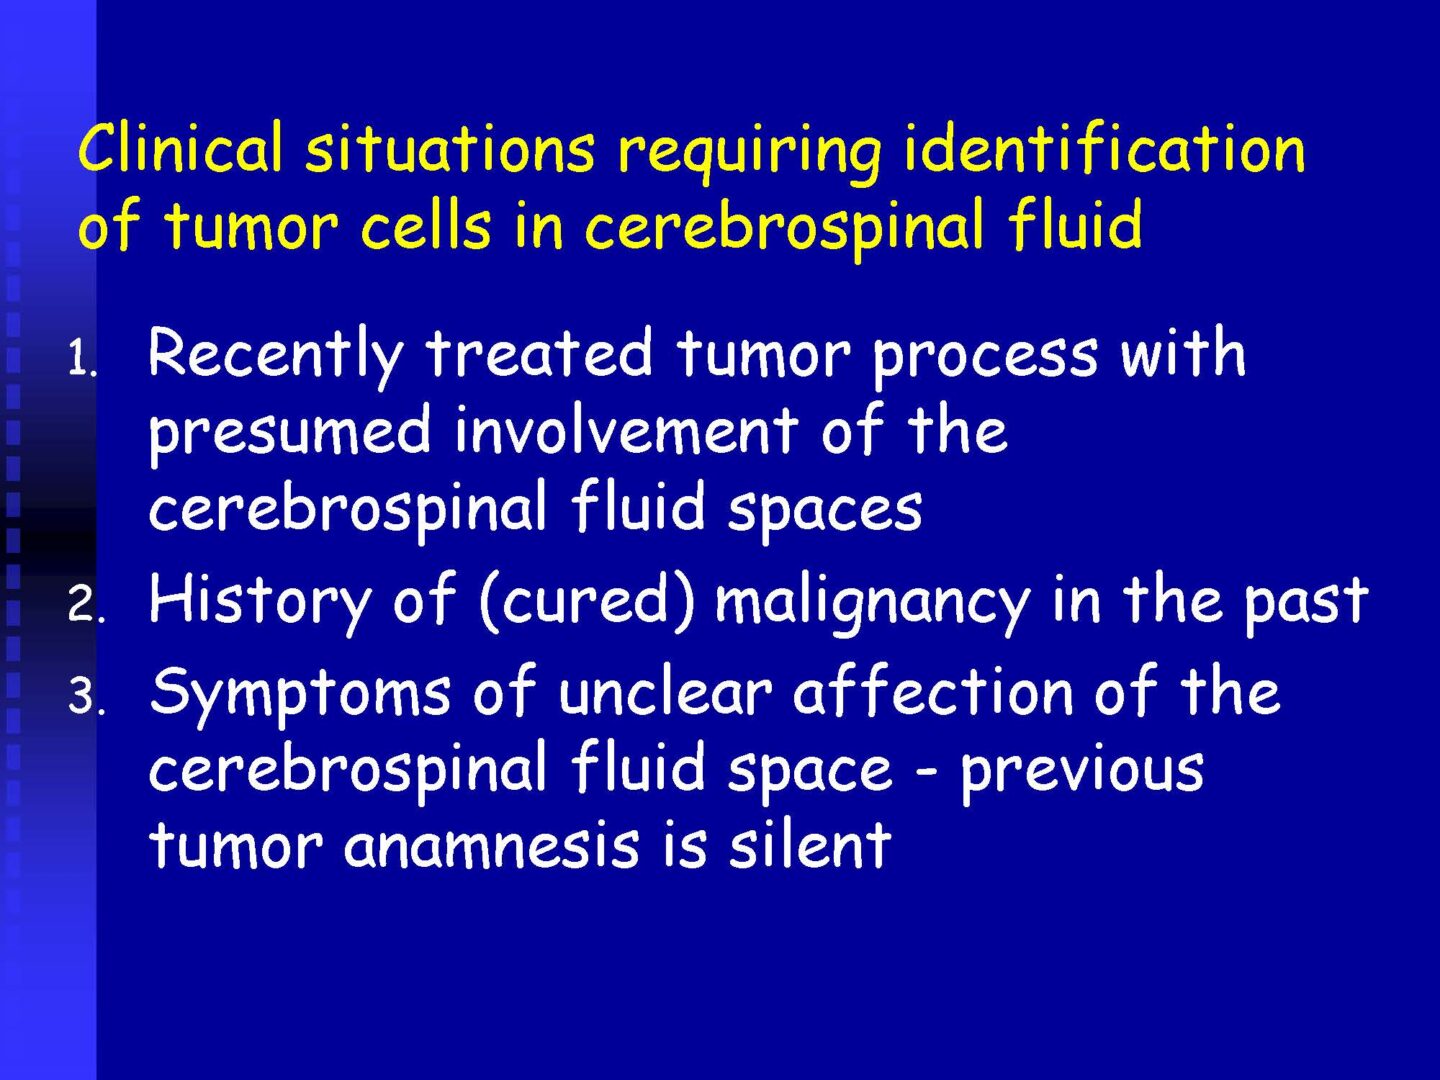 Cytology of the Cerebrospinal fluid - part II_Pagina_16